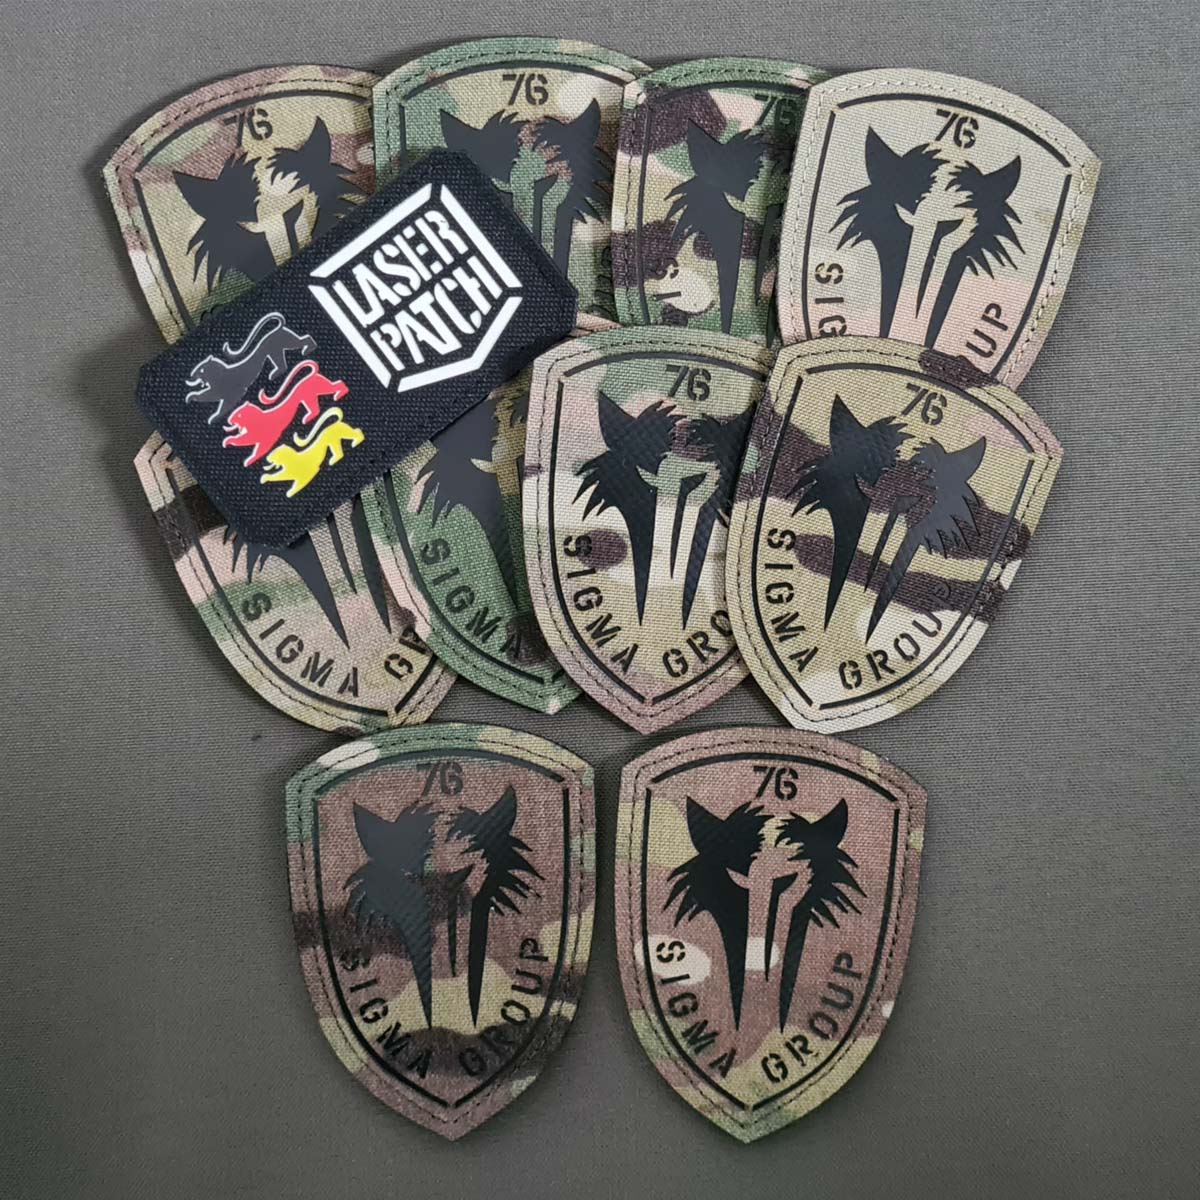 Airsoft Sigma Group Deustchland Laser Cut Patch